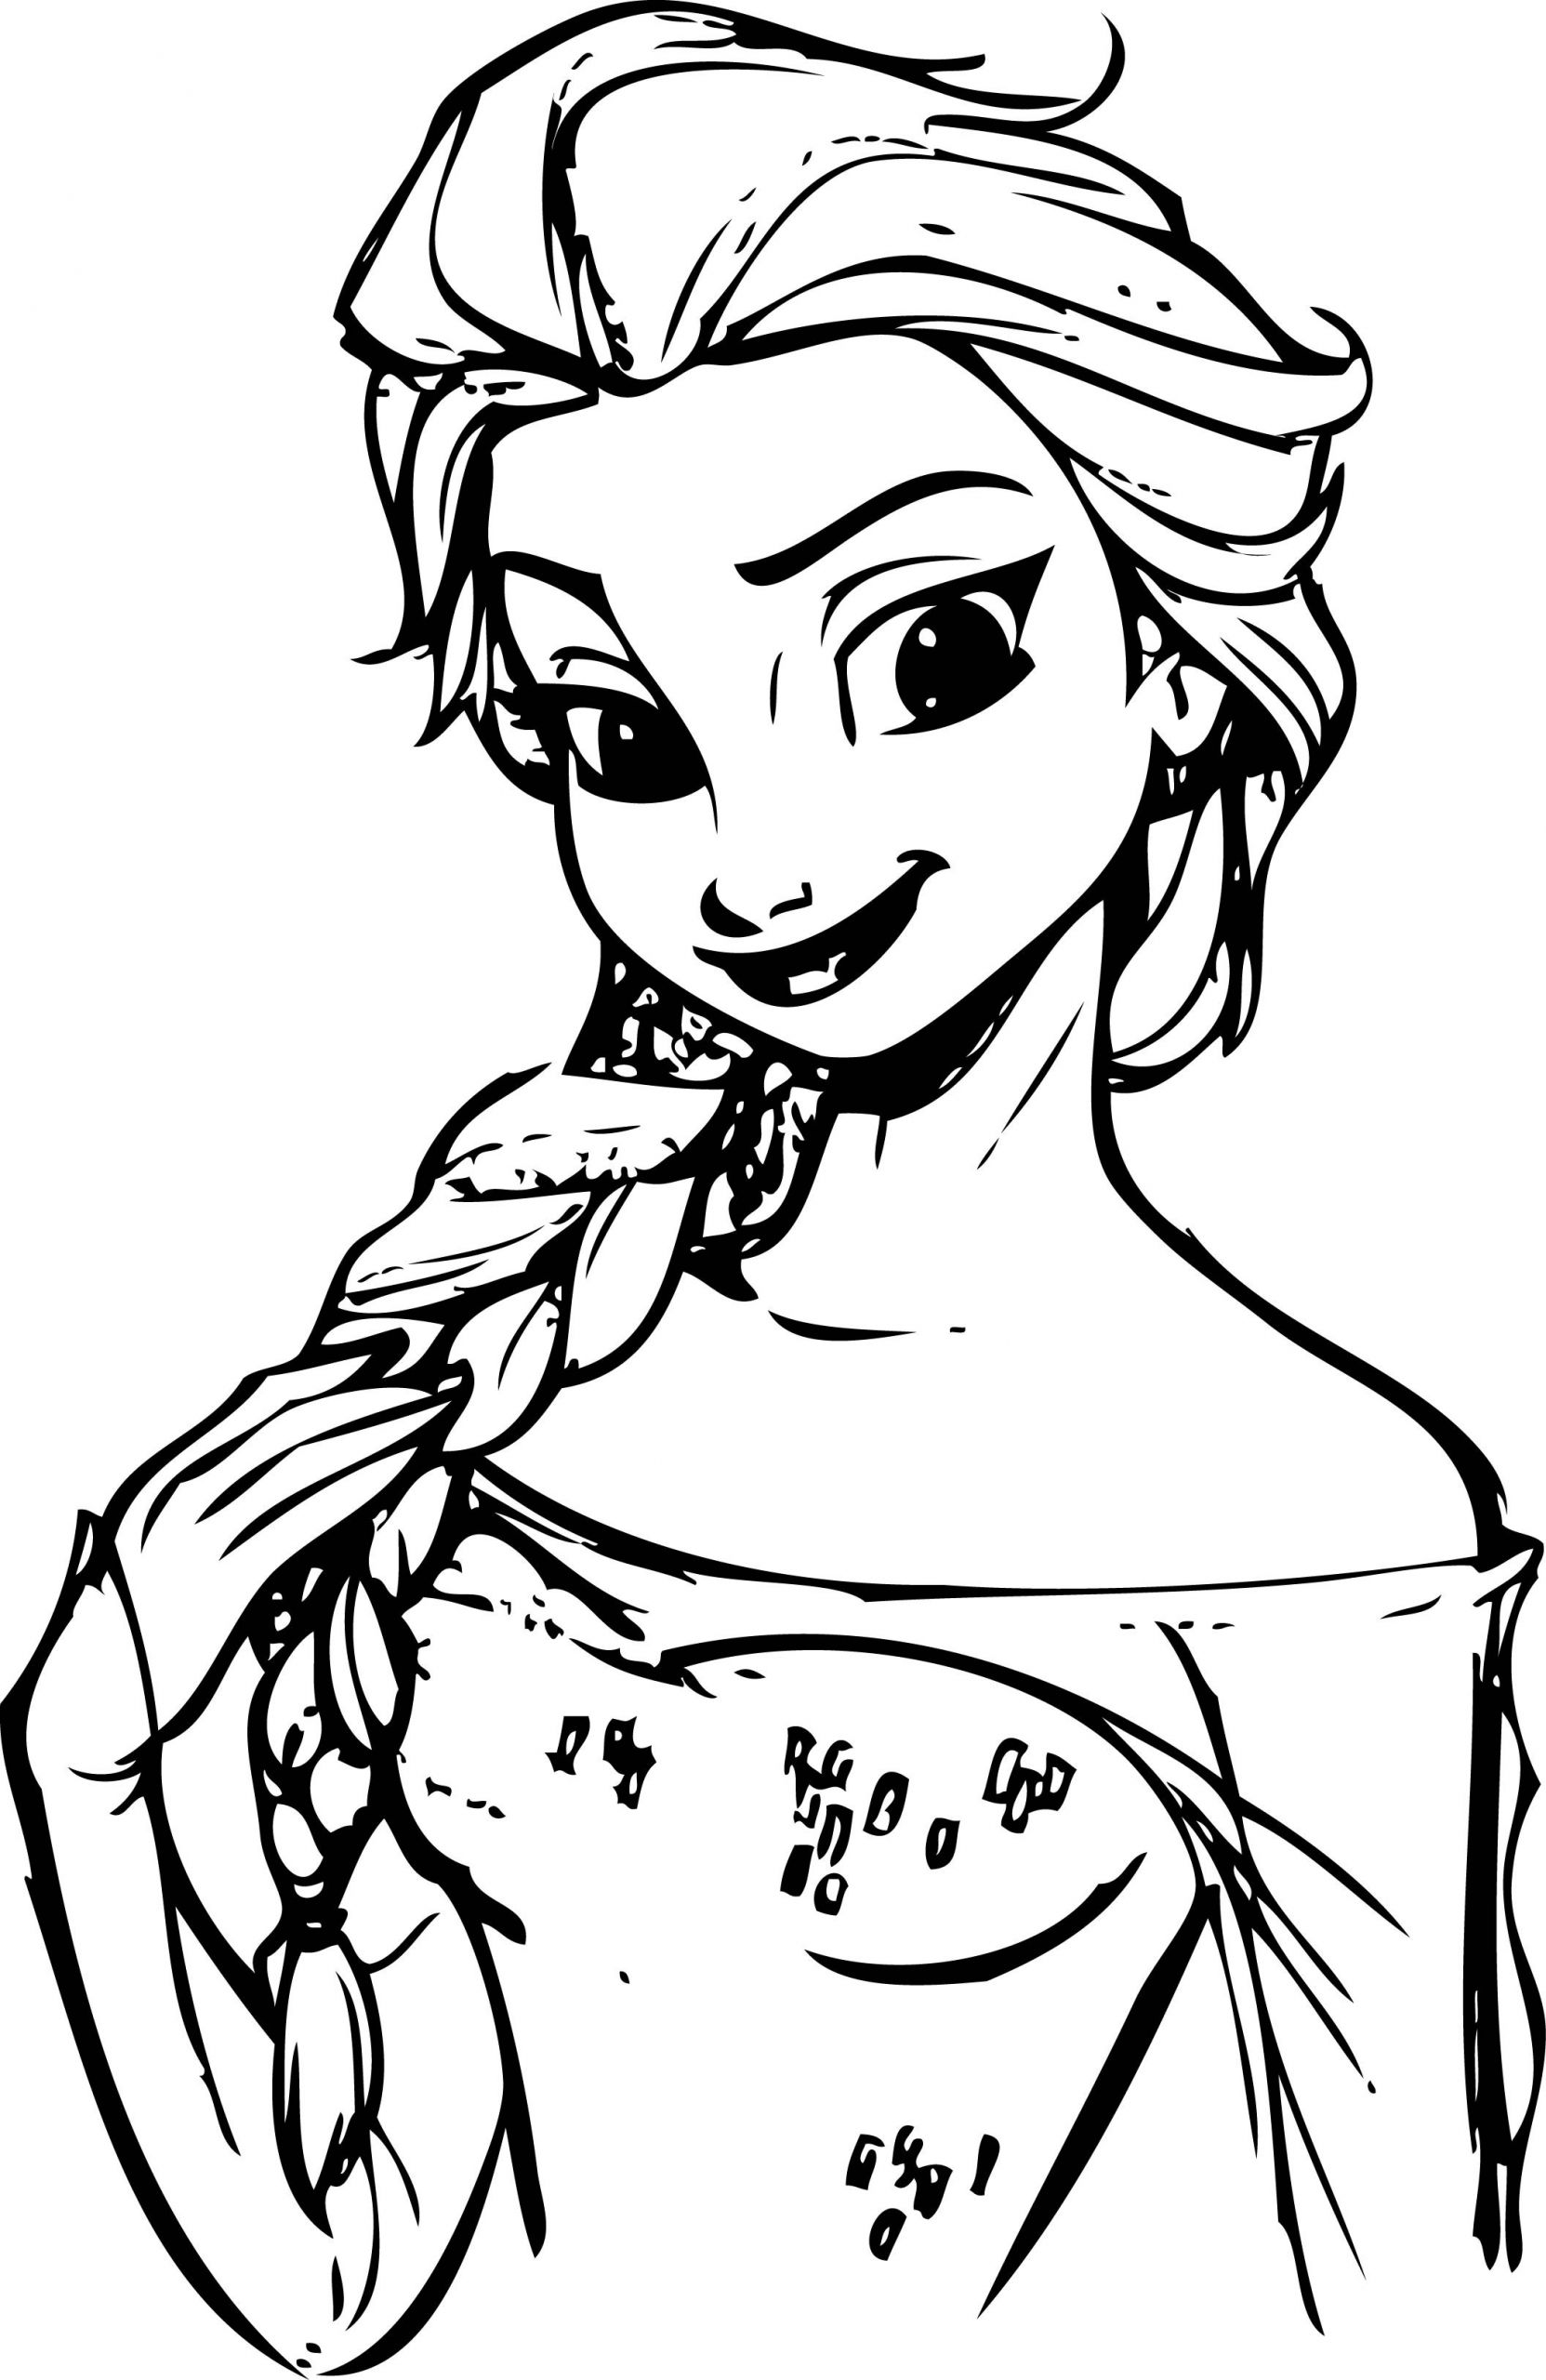 Coloring Pages Little Girls
 Frozen Anna Elsa Coloring Page